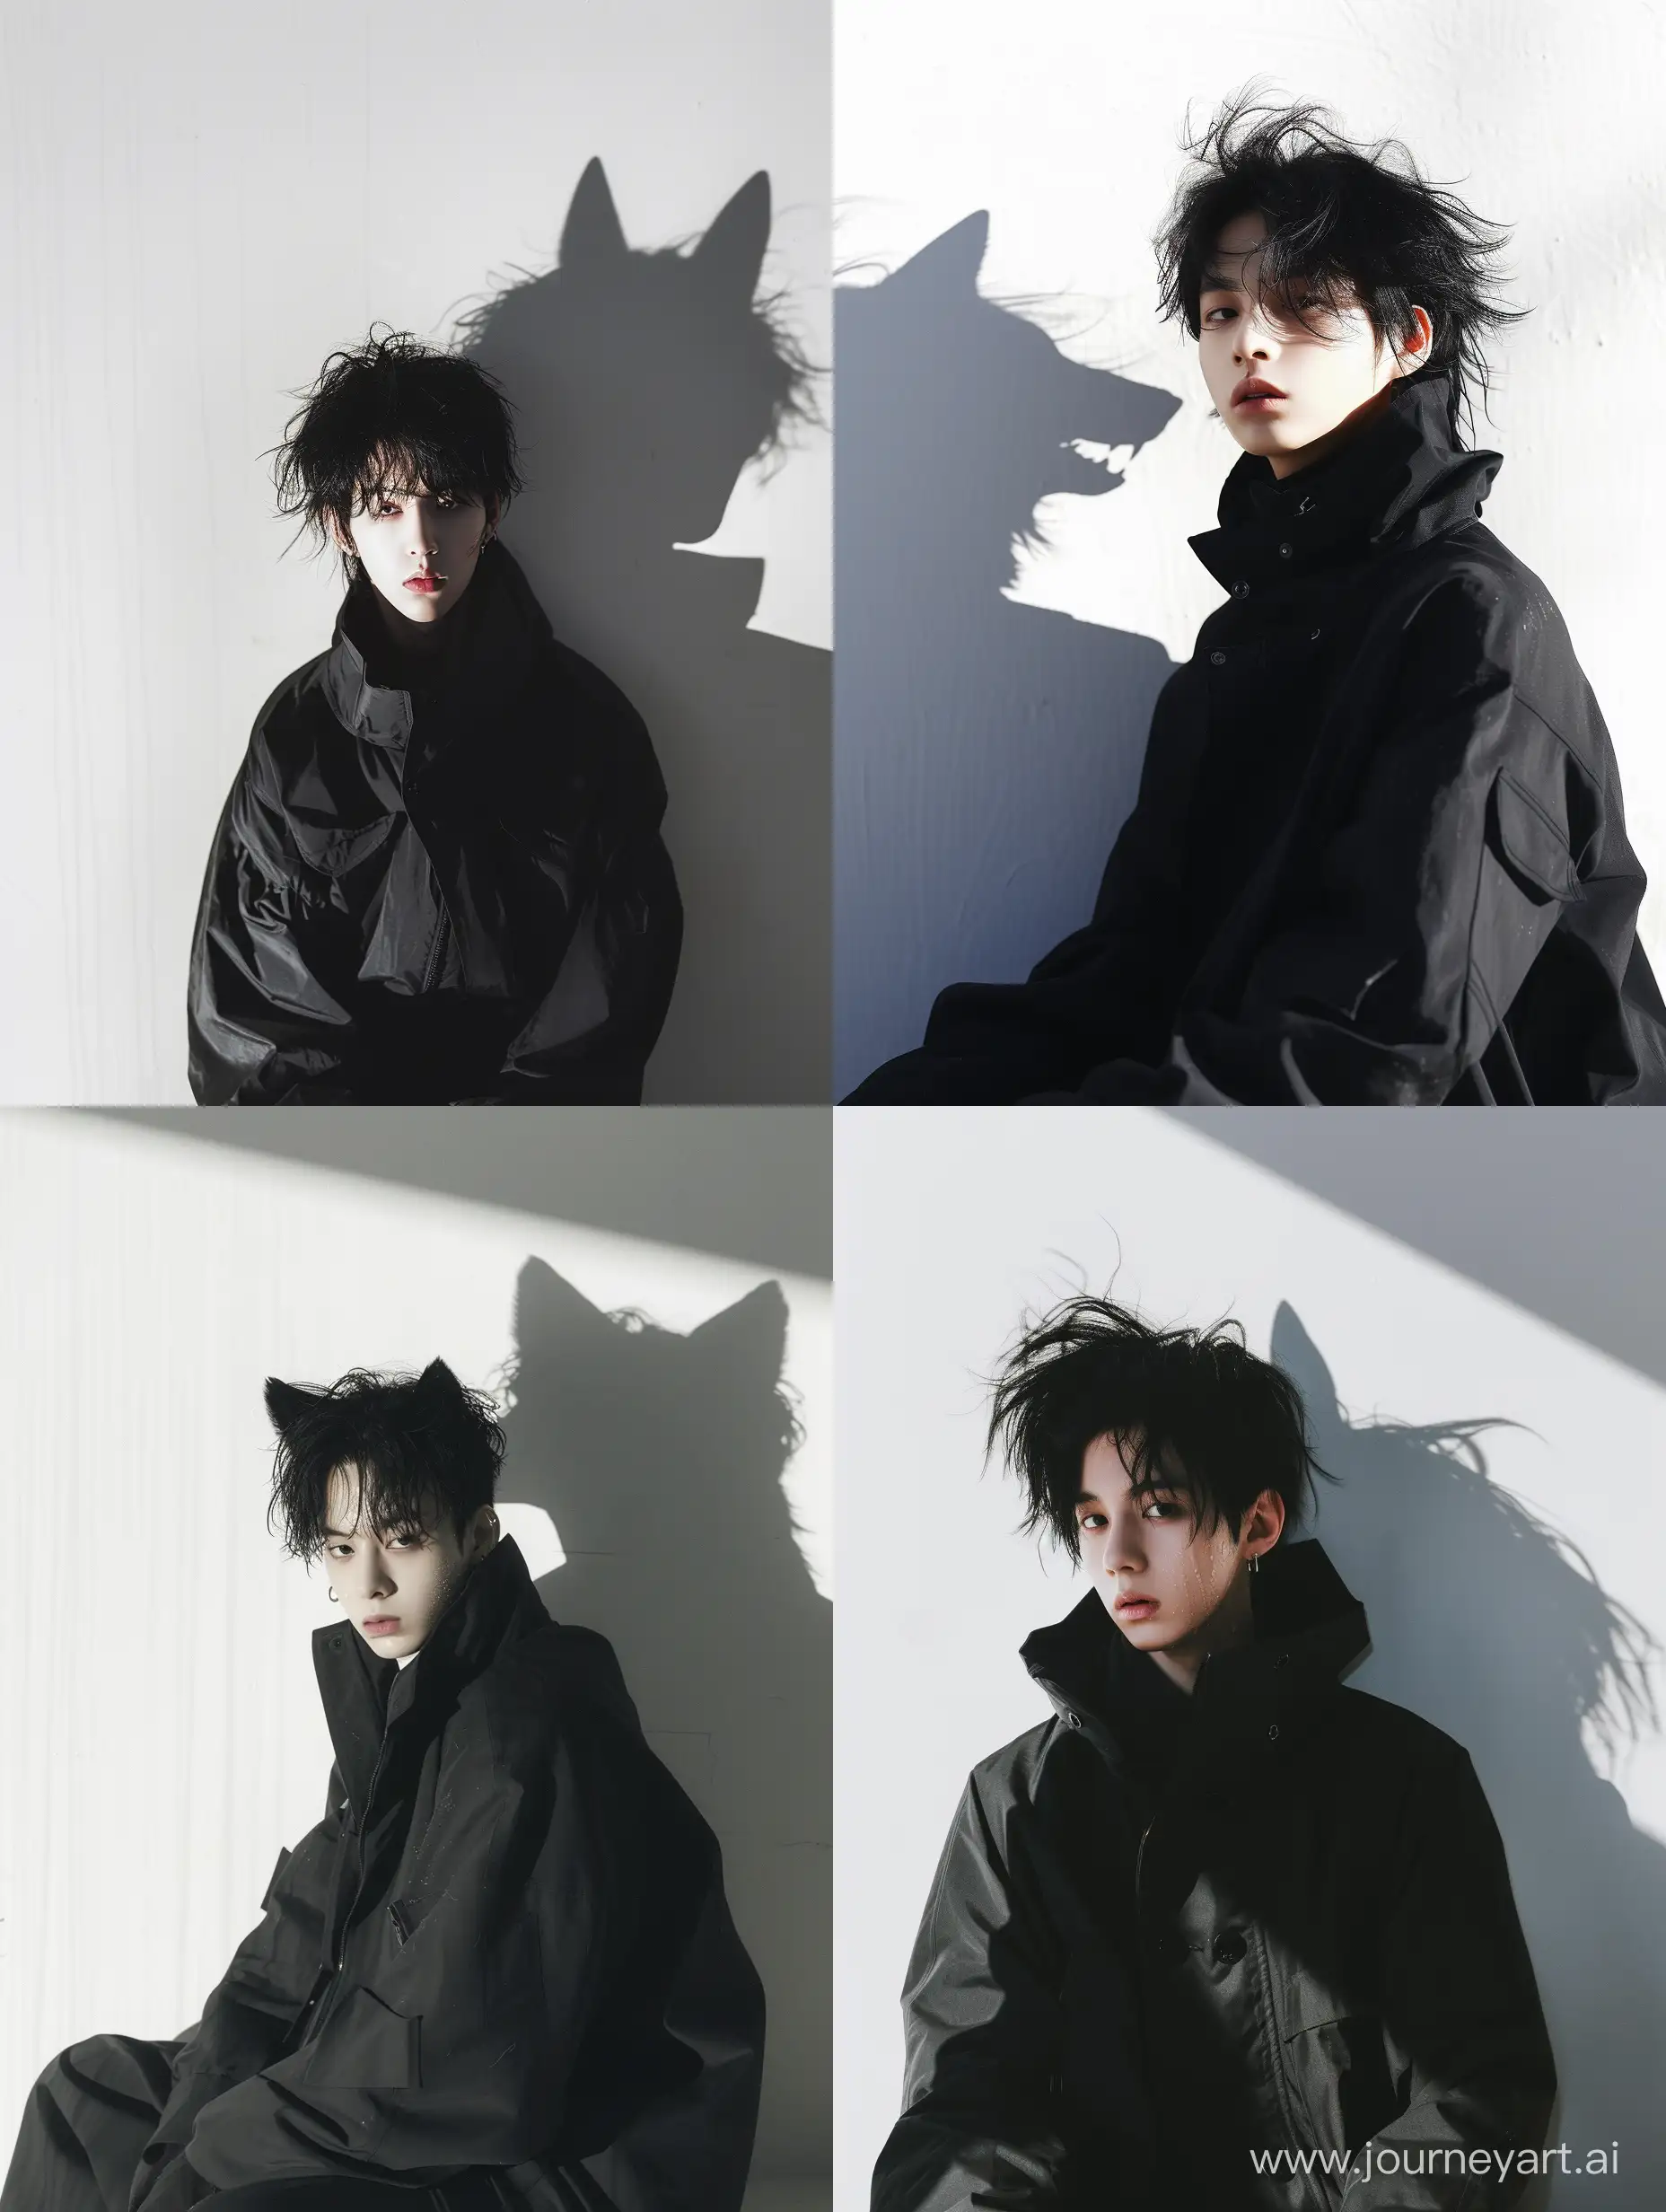 Made a high angle photo of a young guy like taehyung (Korean idol), with messy black hair, his body clearly sweating. Ultra HD. The costume is a black parka jacket with a high collar. Sitting front a white wall. His shadow on the wall look like wolf